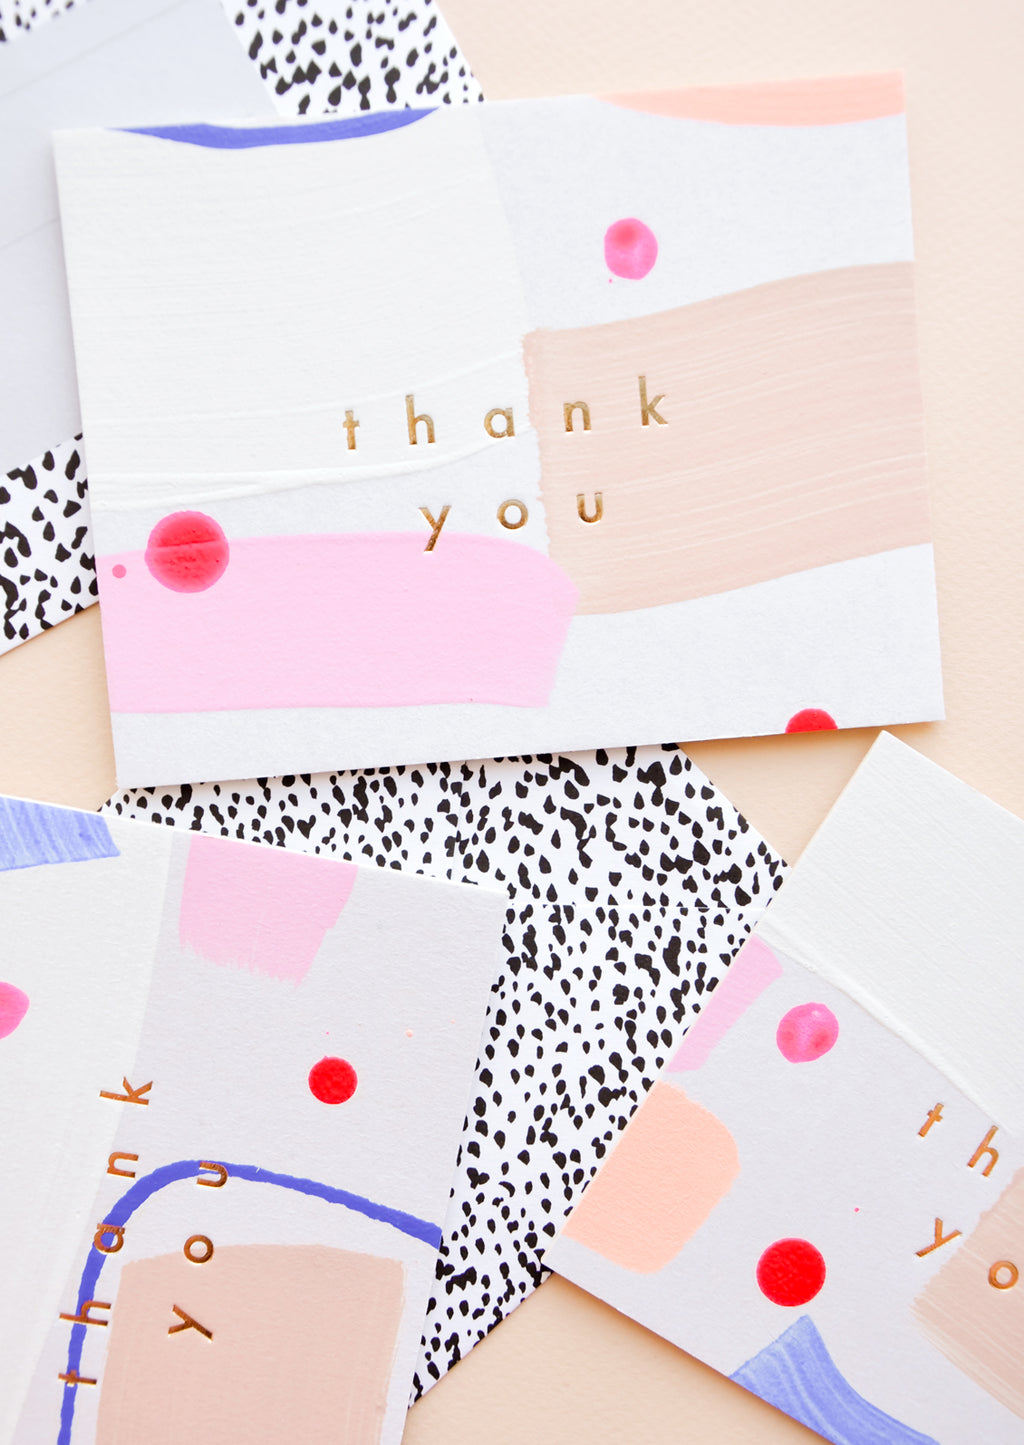 1: Set of thank you cards hand painted in colorful abstract pattern with gold foil "Thank you" text